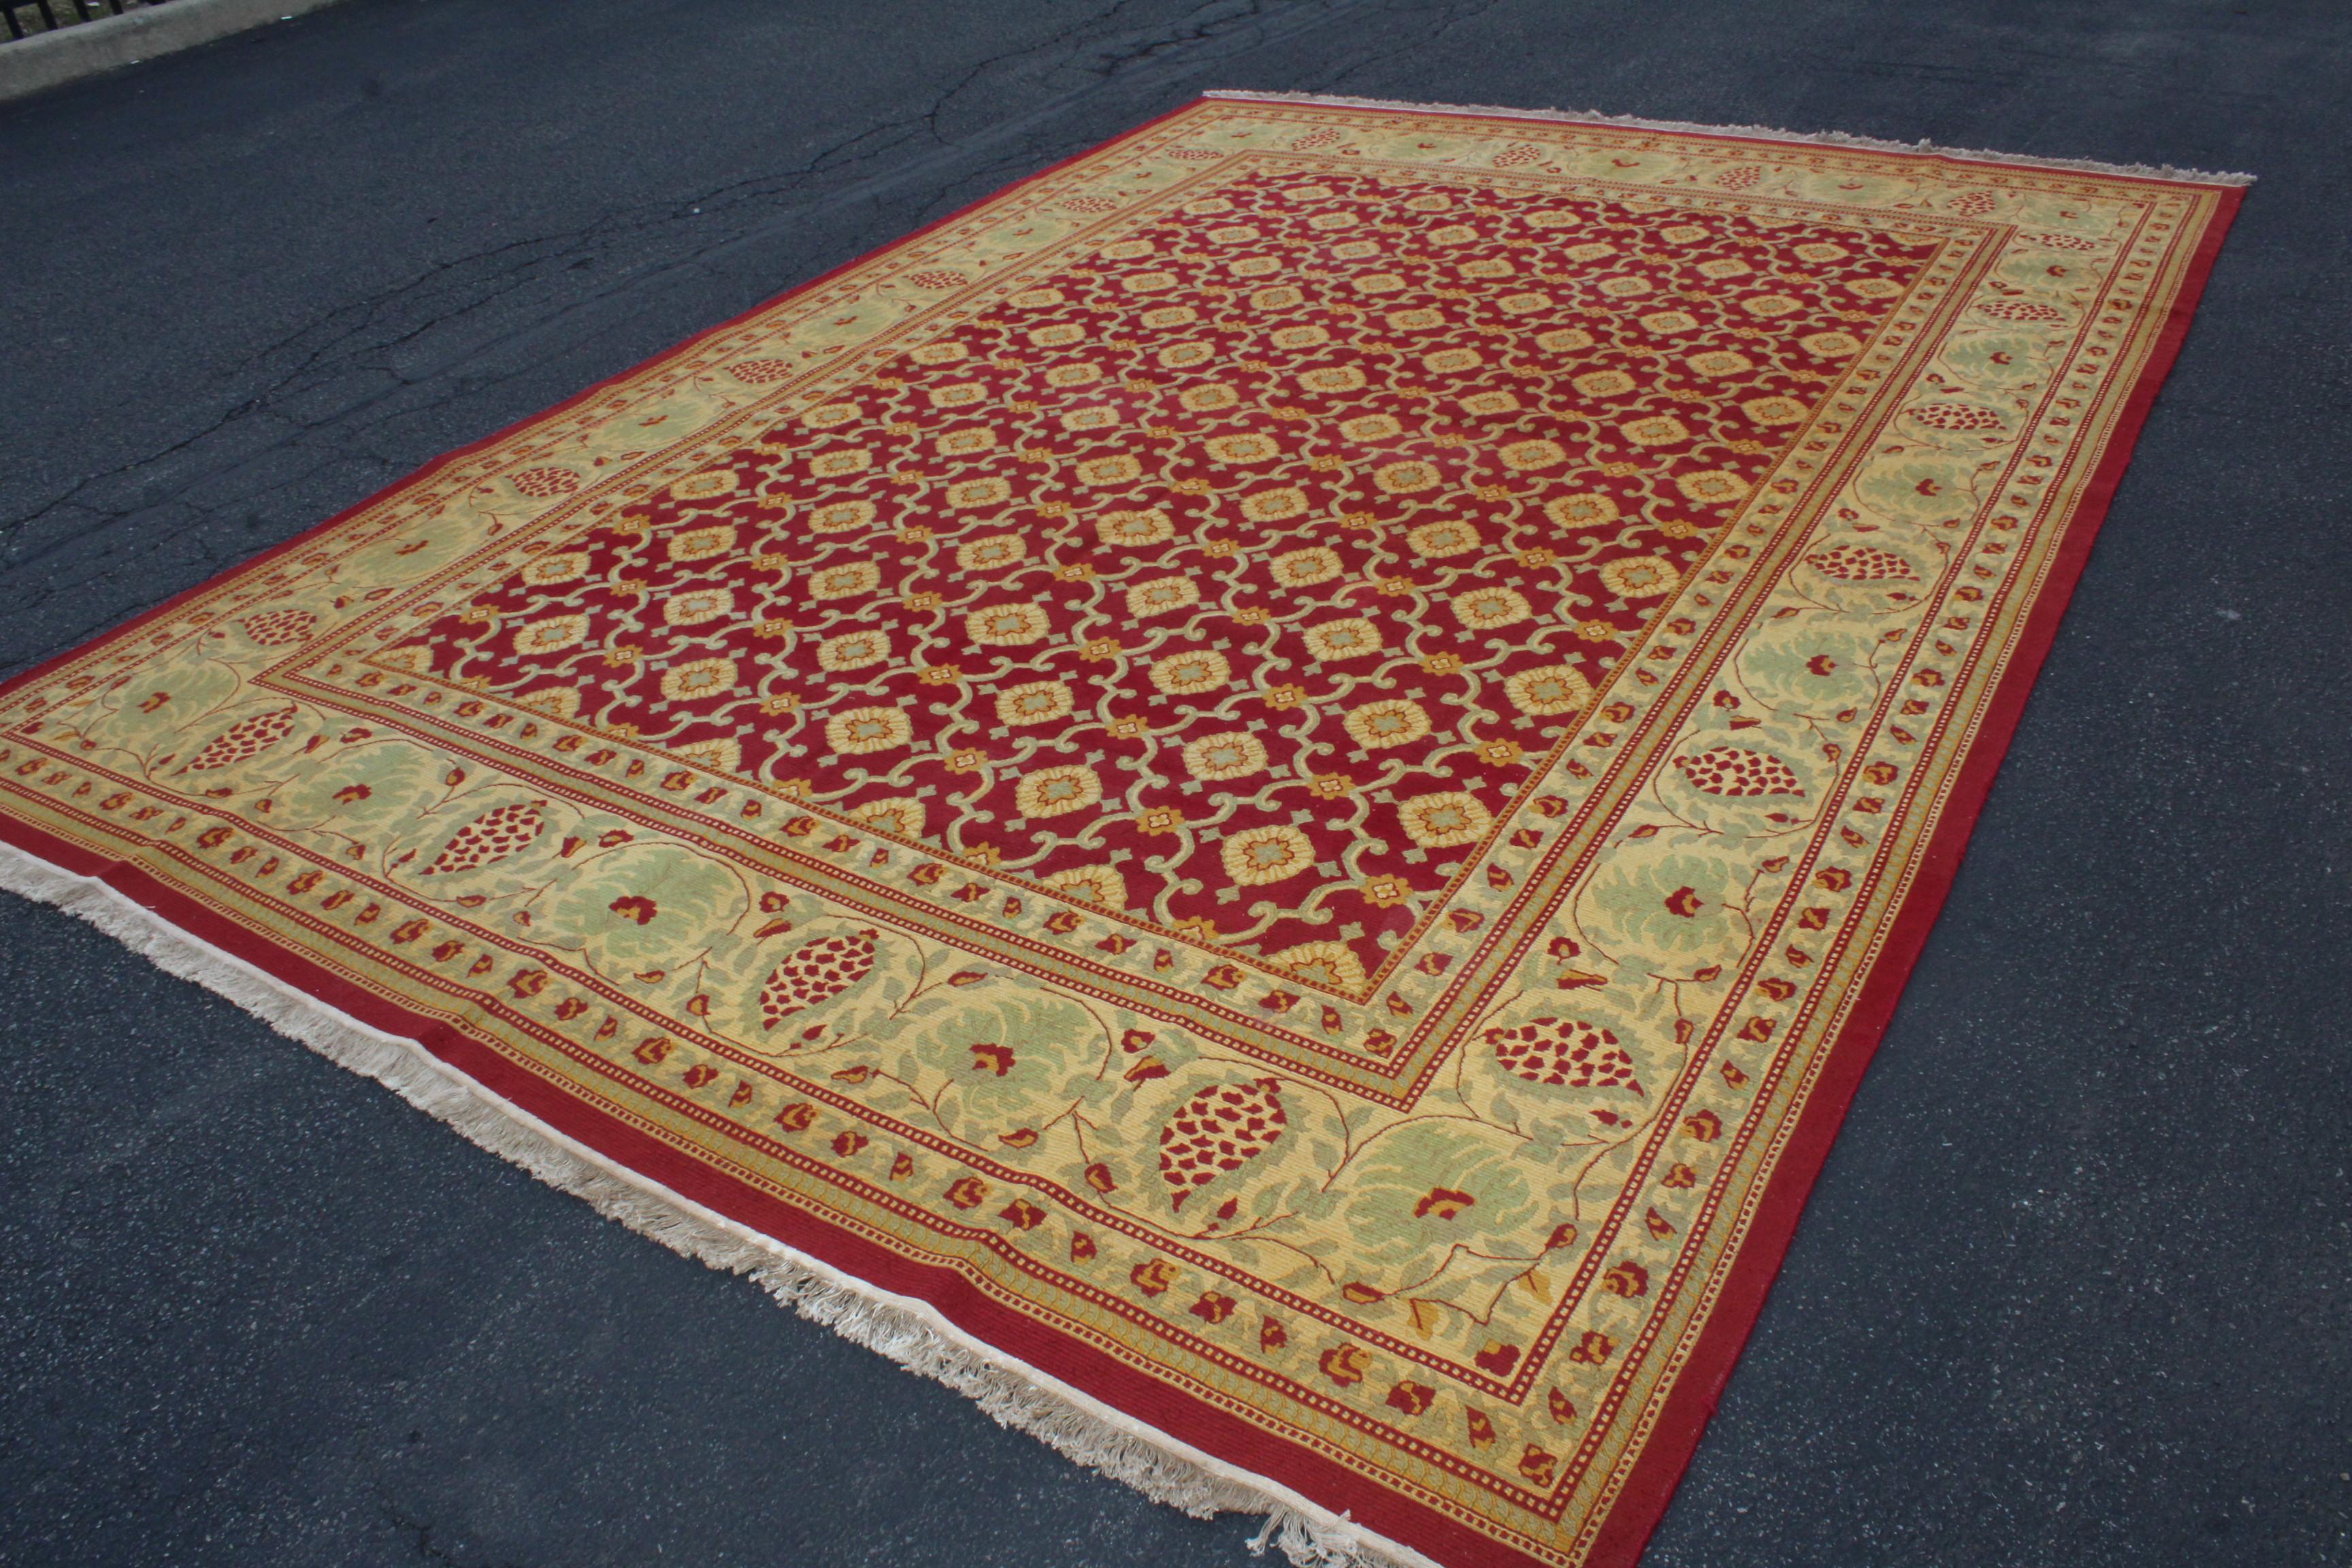 1940s Art Deco Oversize Rug from India 9